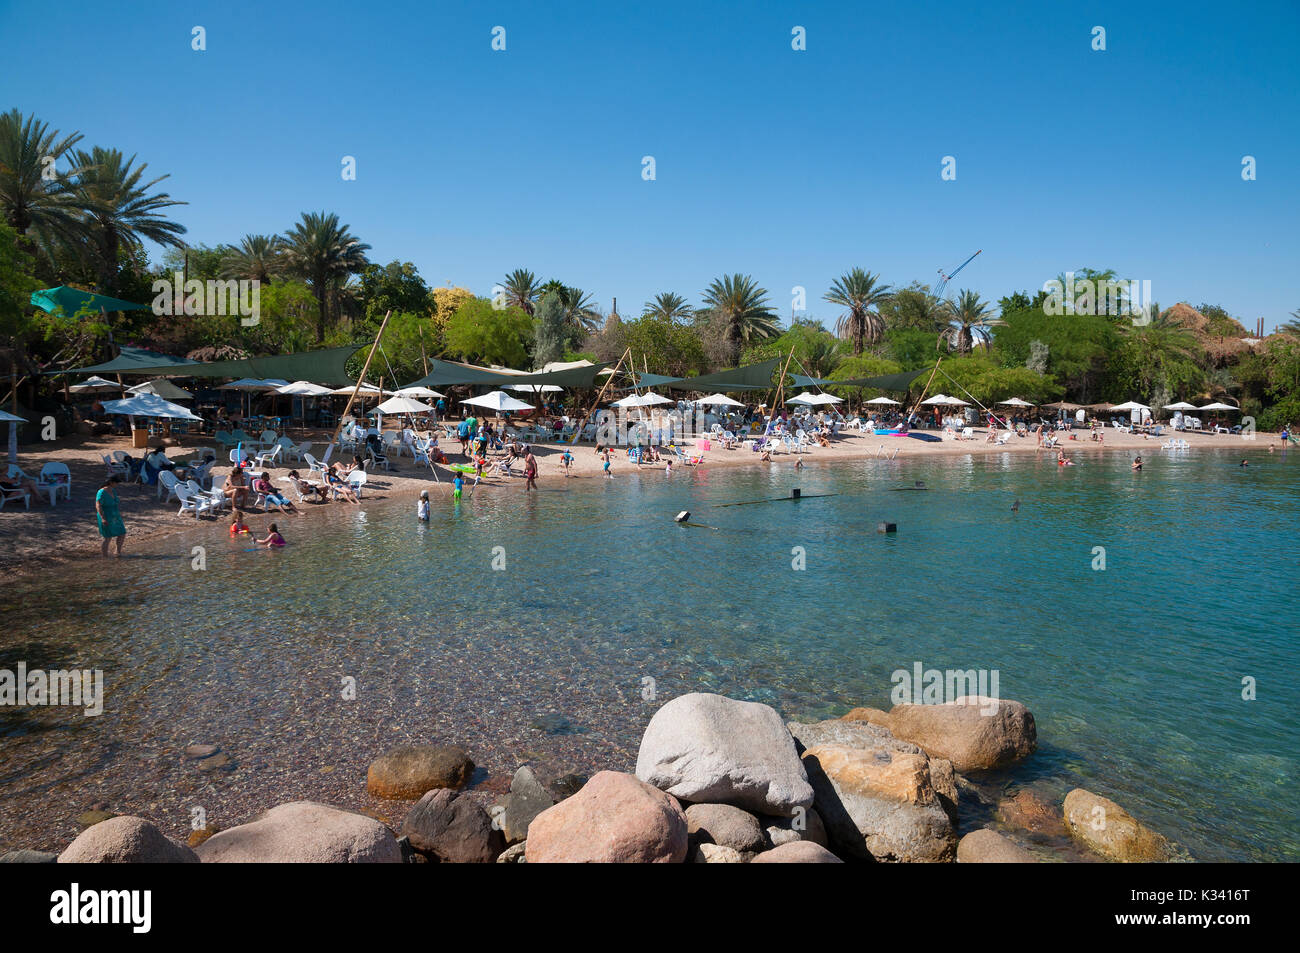 The Red Sea, Eilat, Israel Stock Photo